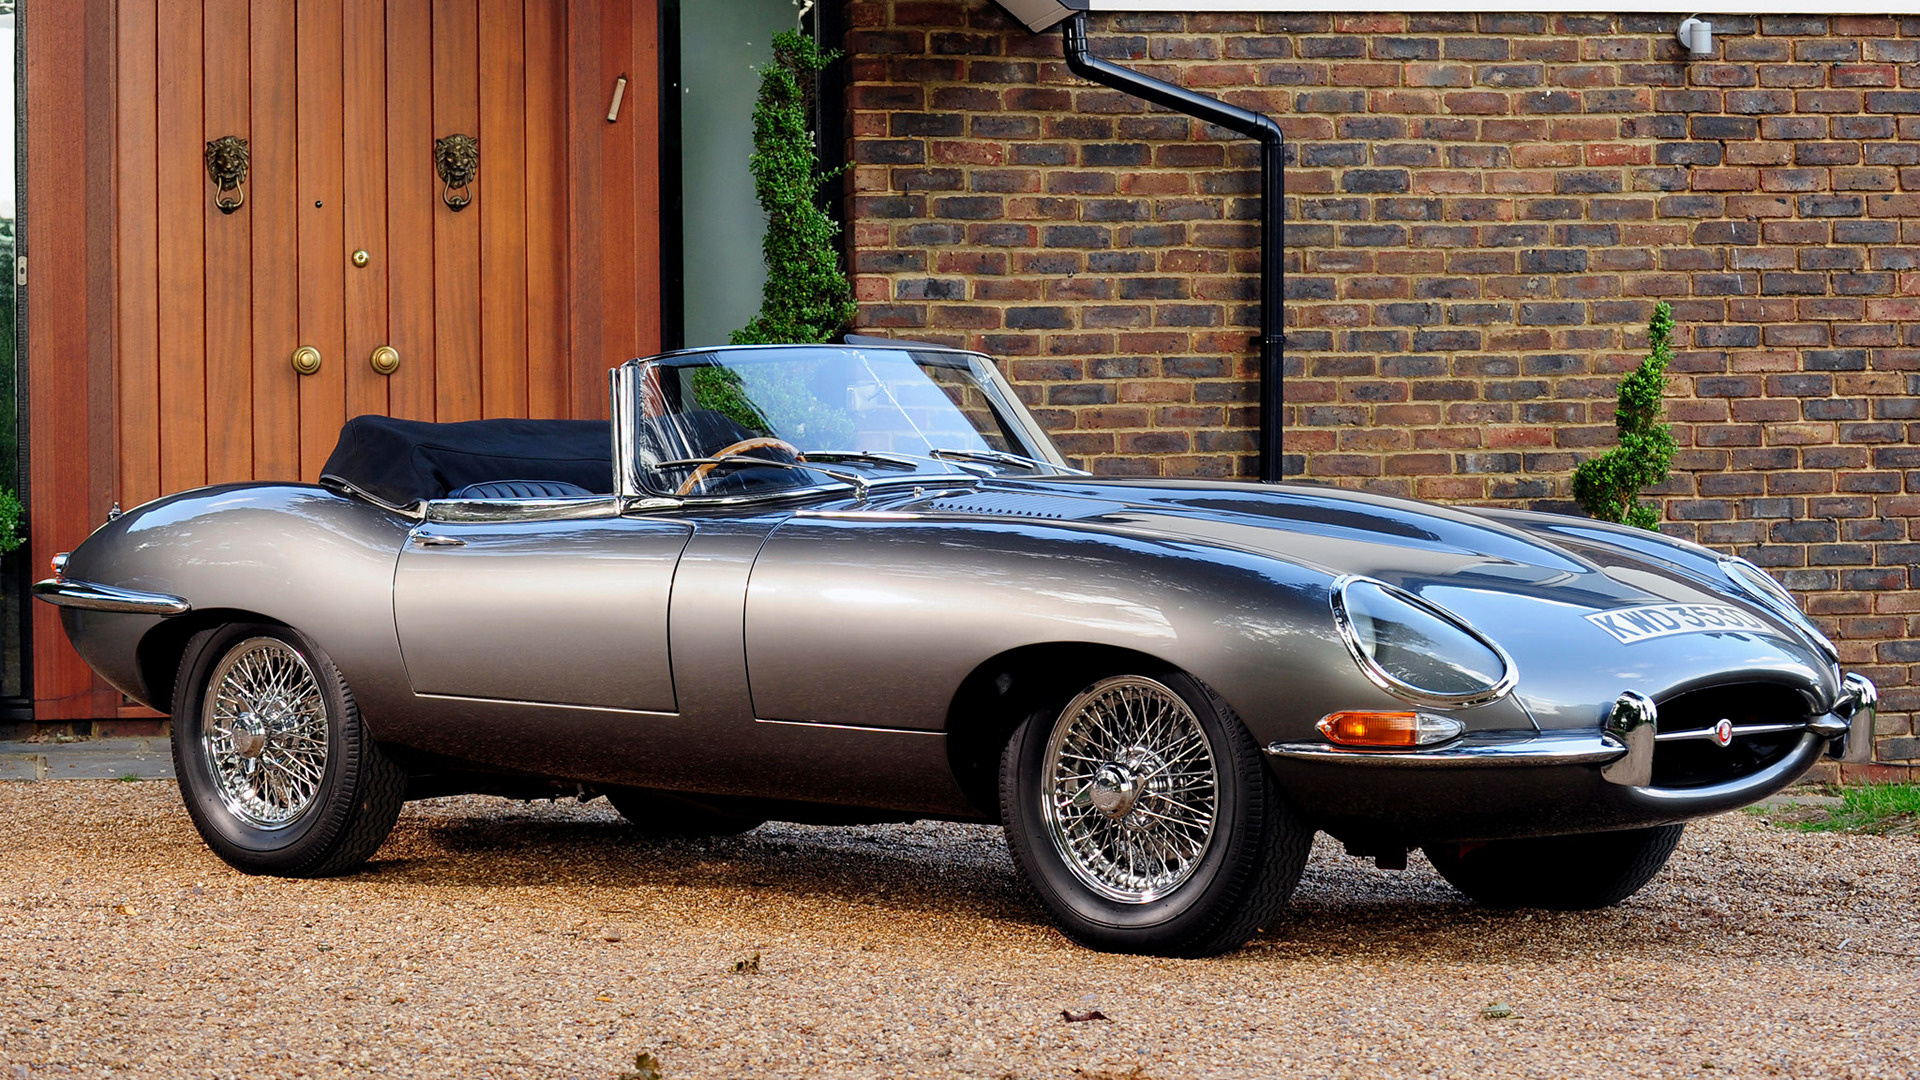 Jaguar E Type Open Two Seater Uk Wallpaper And HD Image